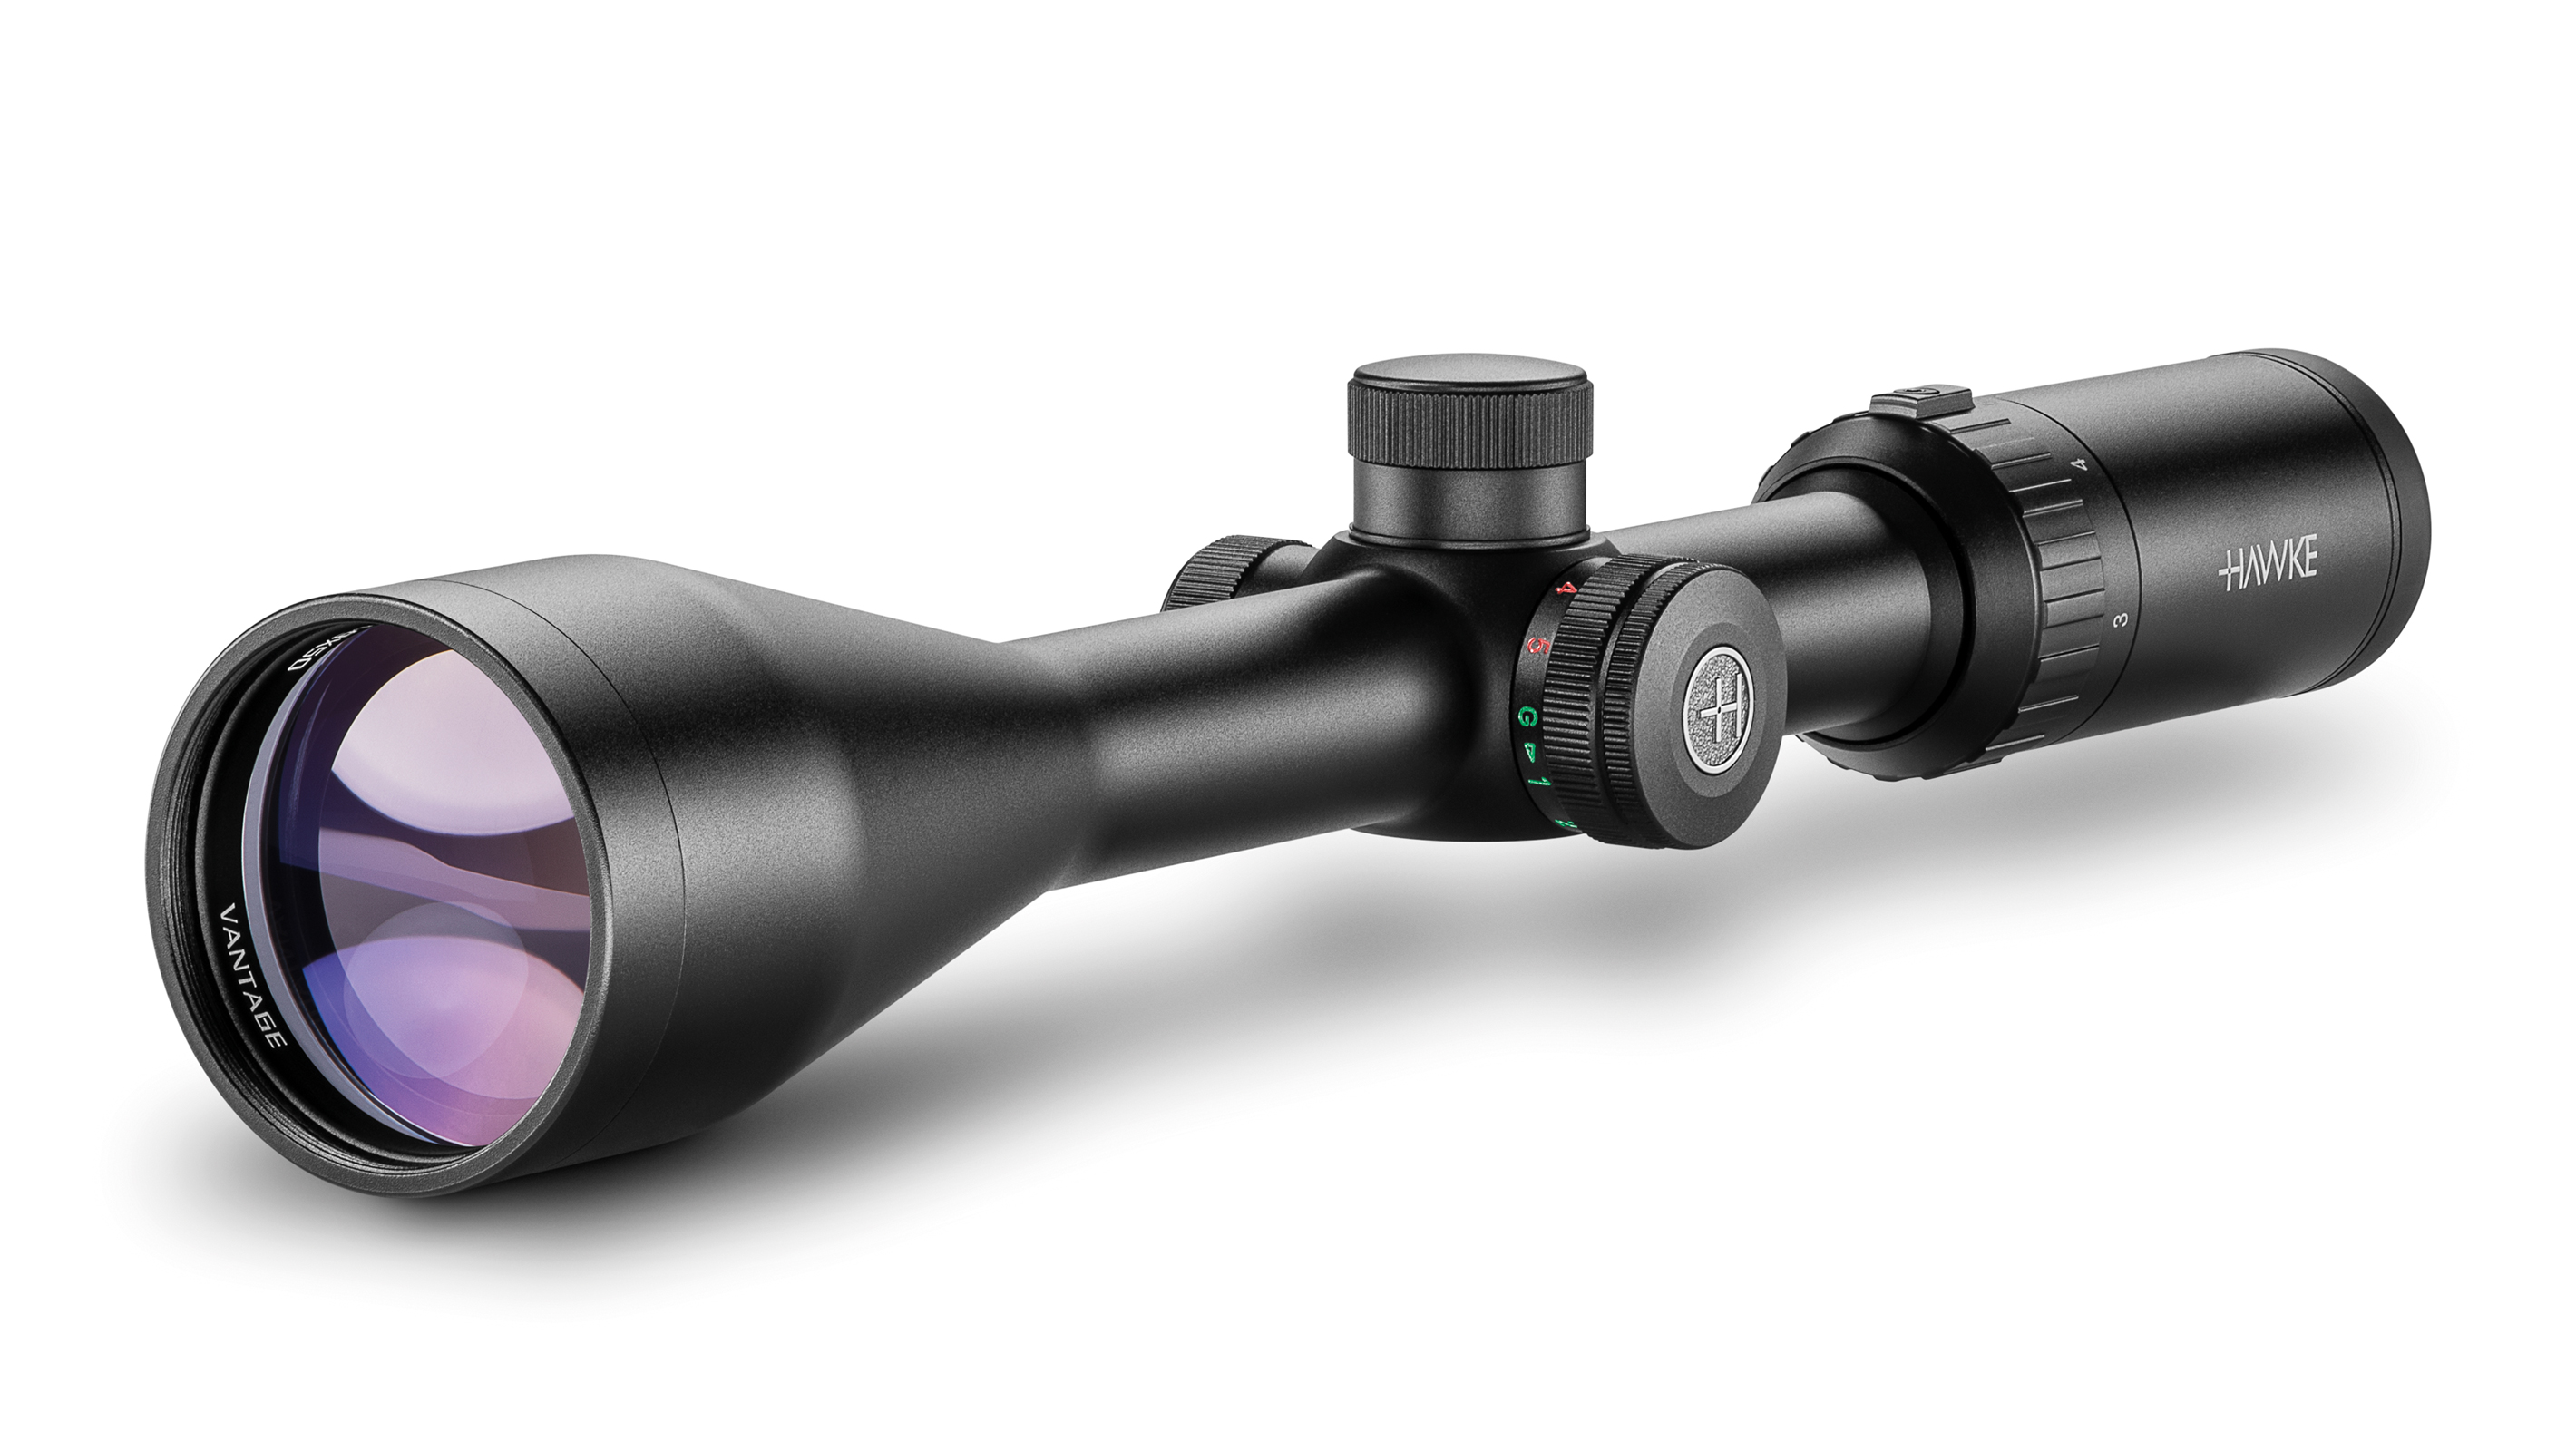 Objective End View Of The Hawke Vantage IR 3-9x50 Mil Dot Rifle Scope